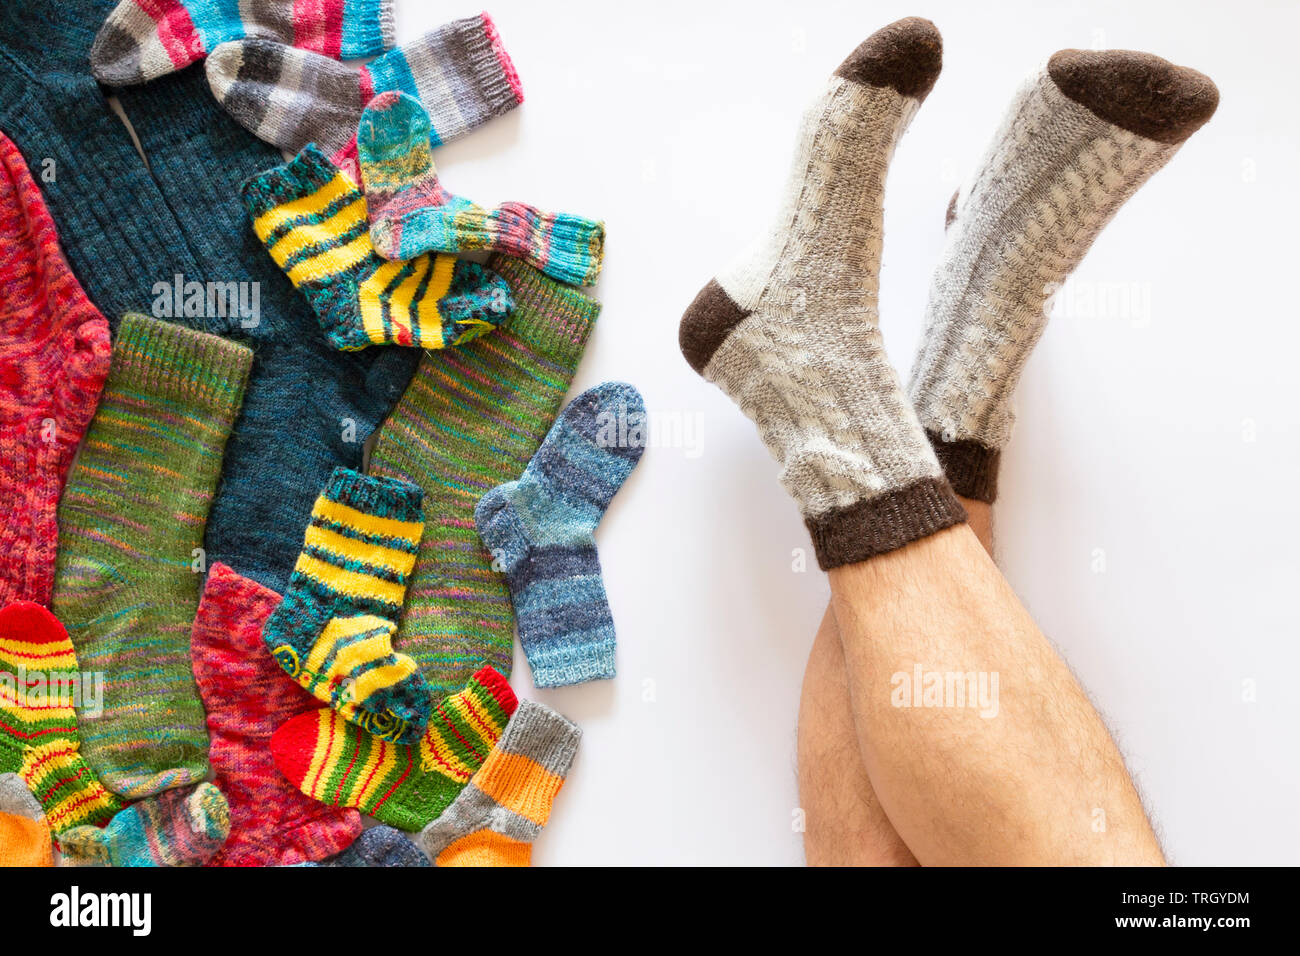 Top view of an assortment of colorful woolen socks of various sizes on white background with a pair of feet wearing gray brown socks Stock Photo